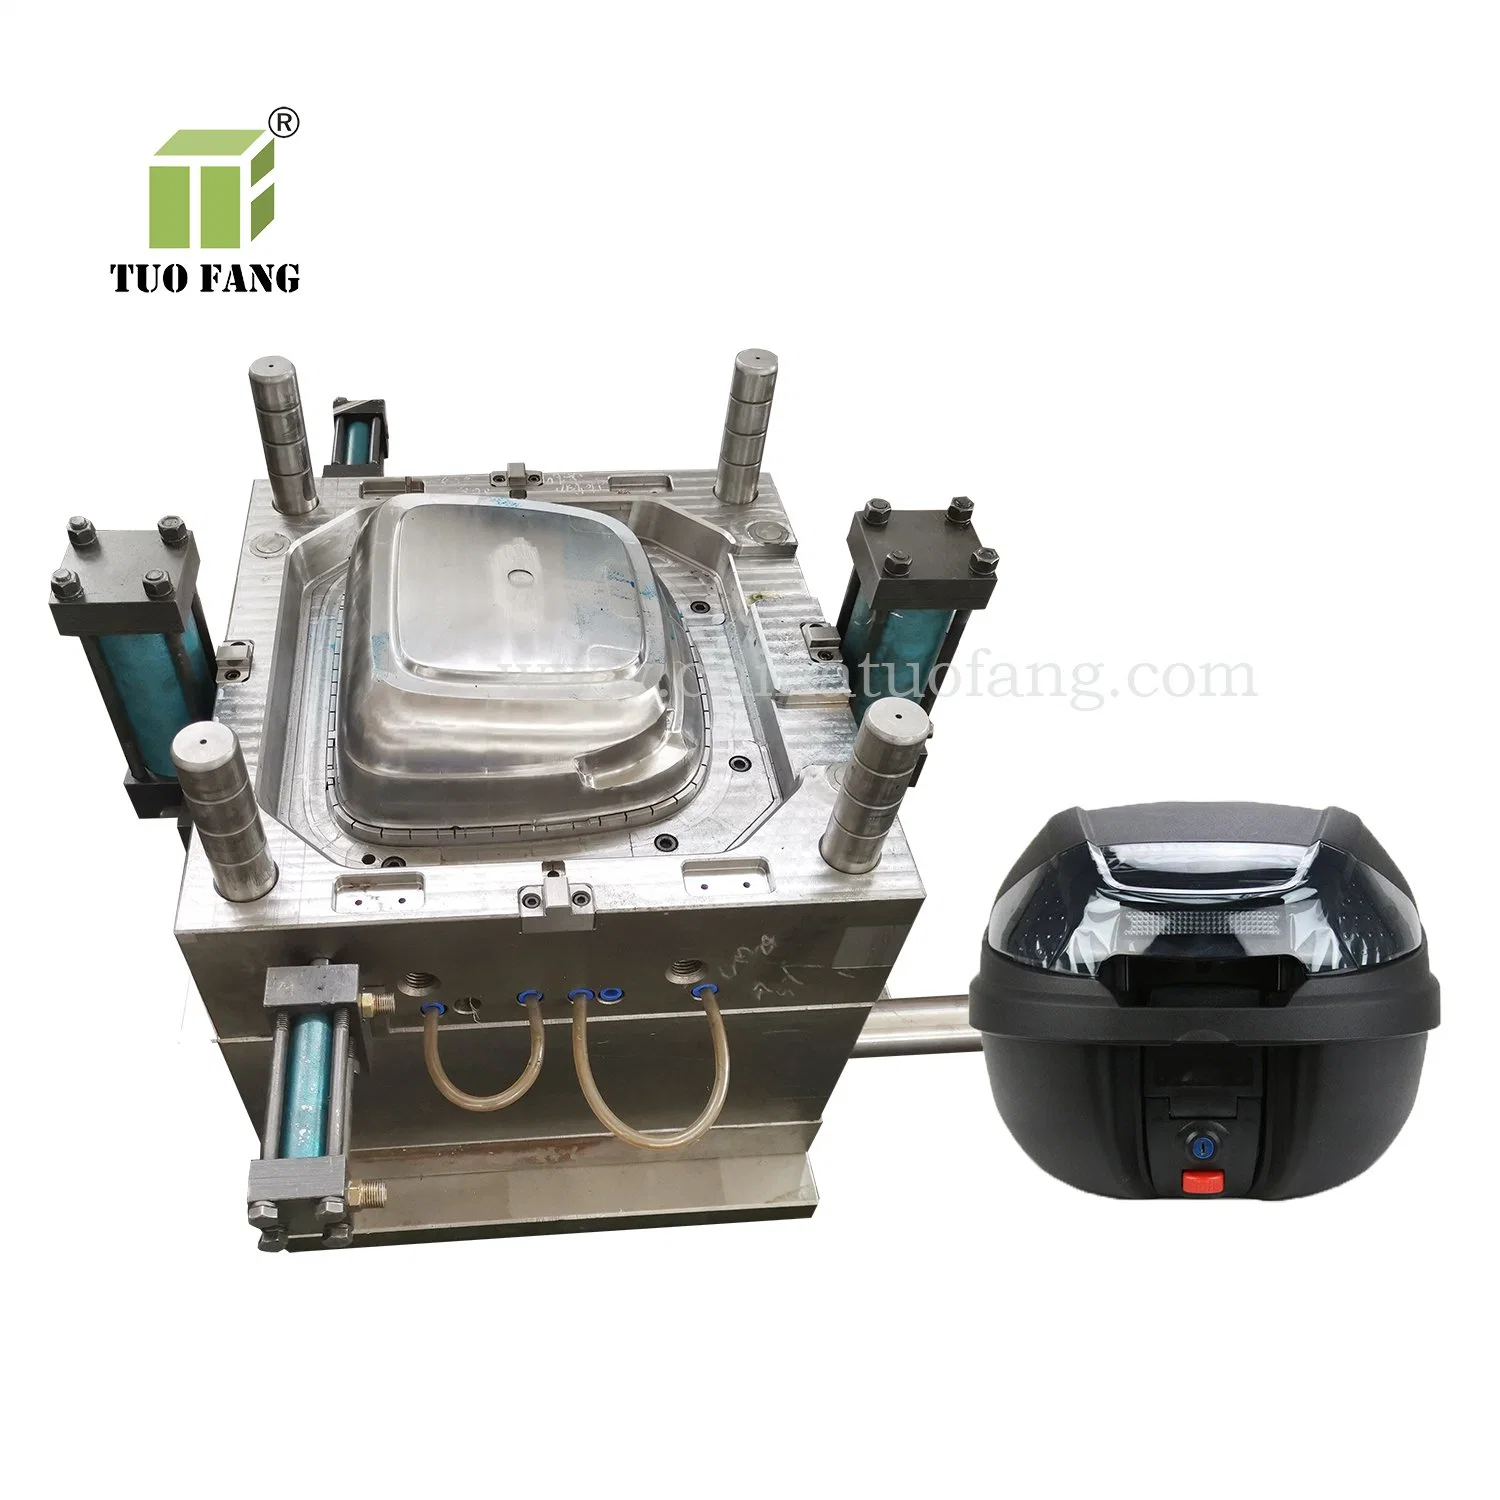 Plastic Motorbike Storage Box Mould Plastic Injection Mould for Motorcycle Storage Box